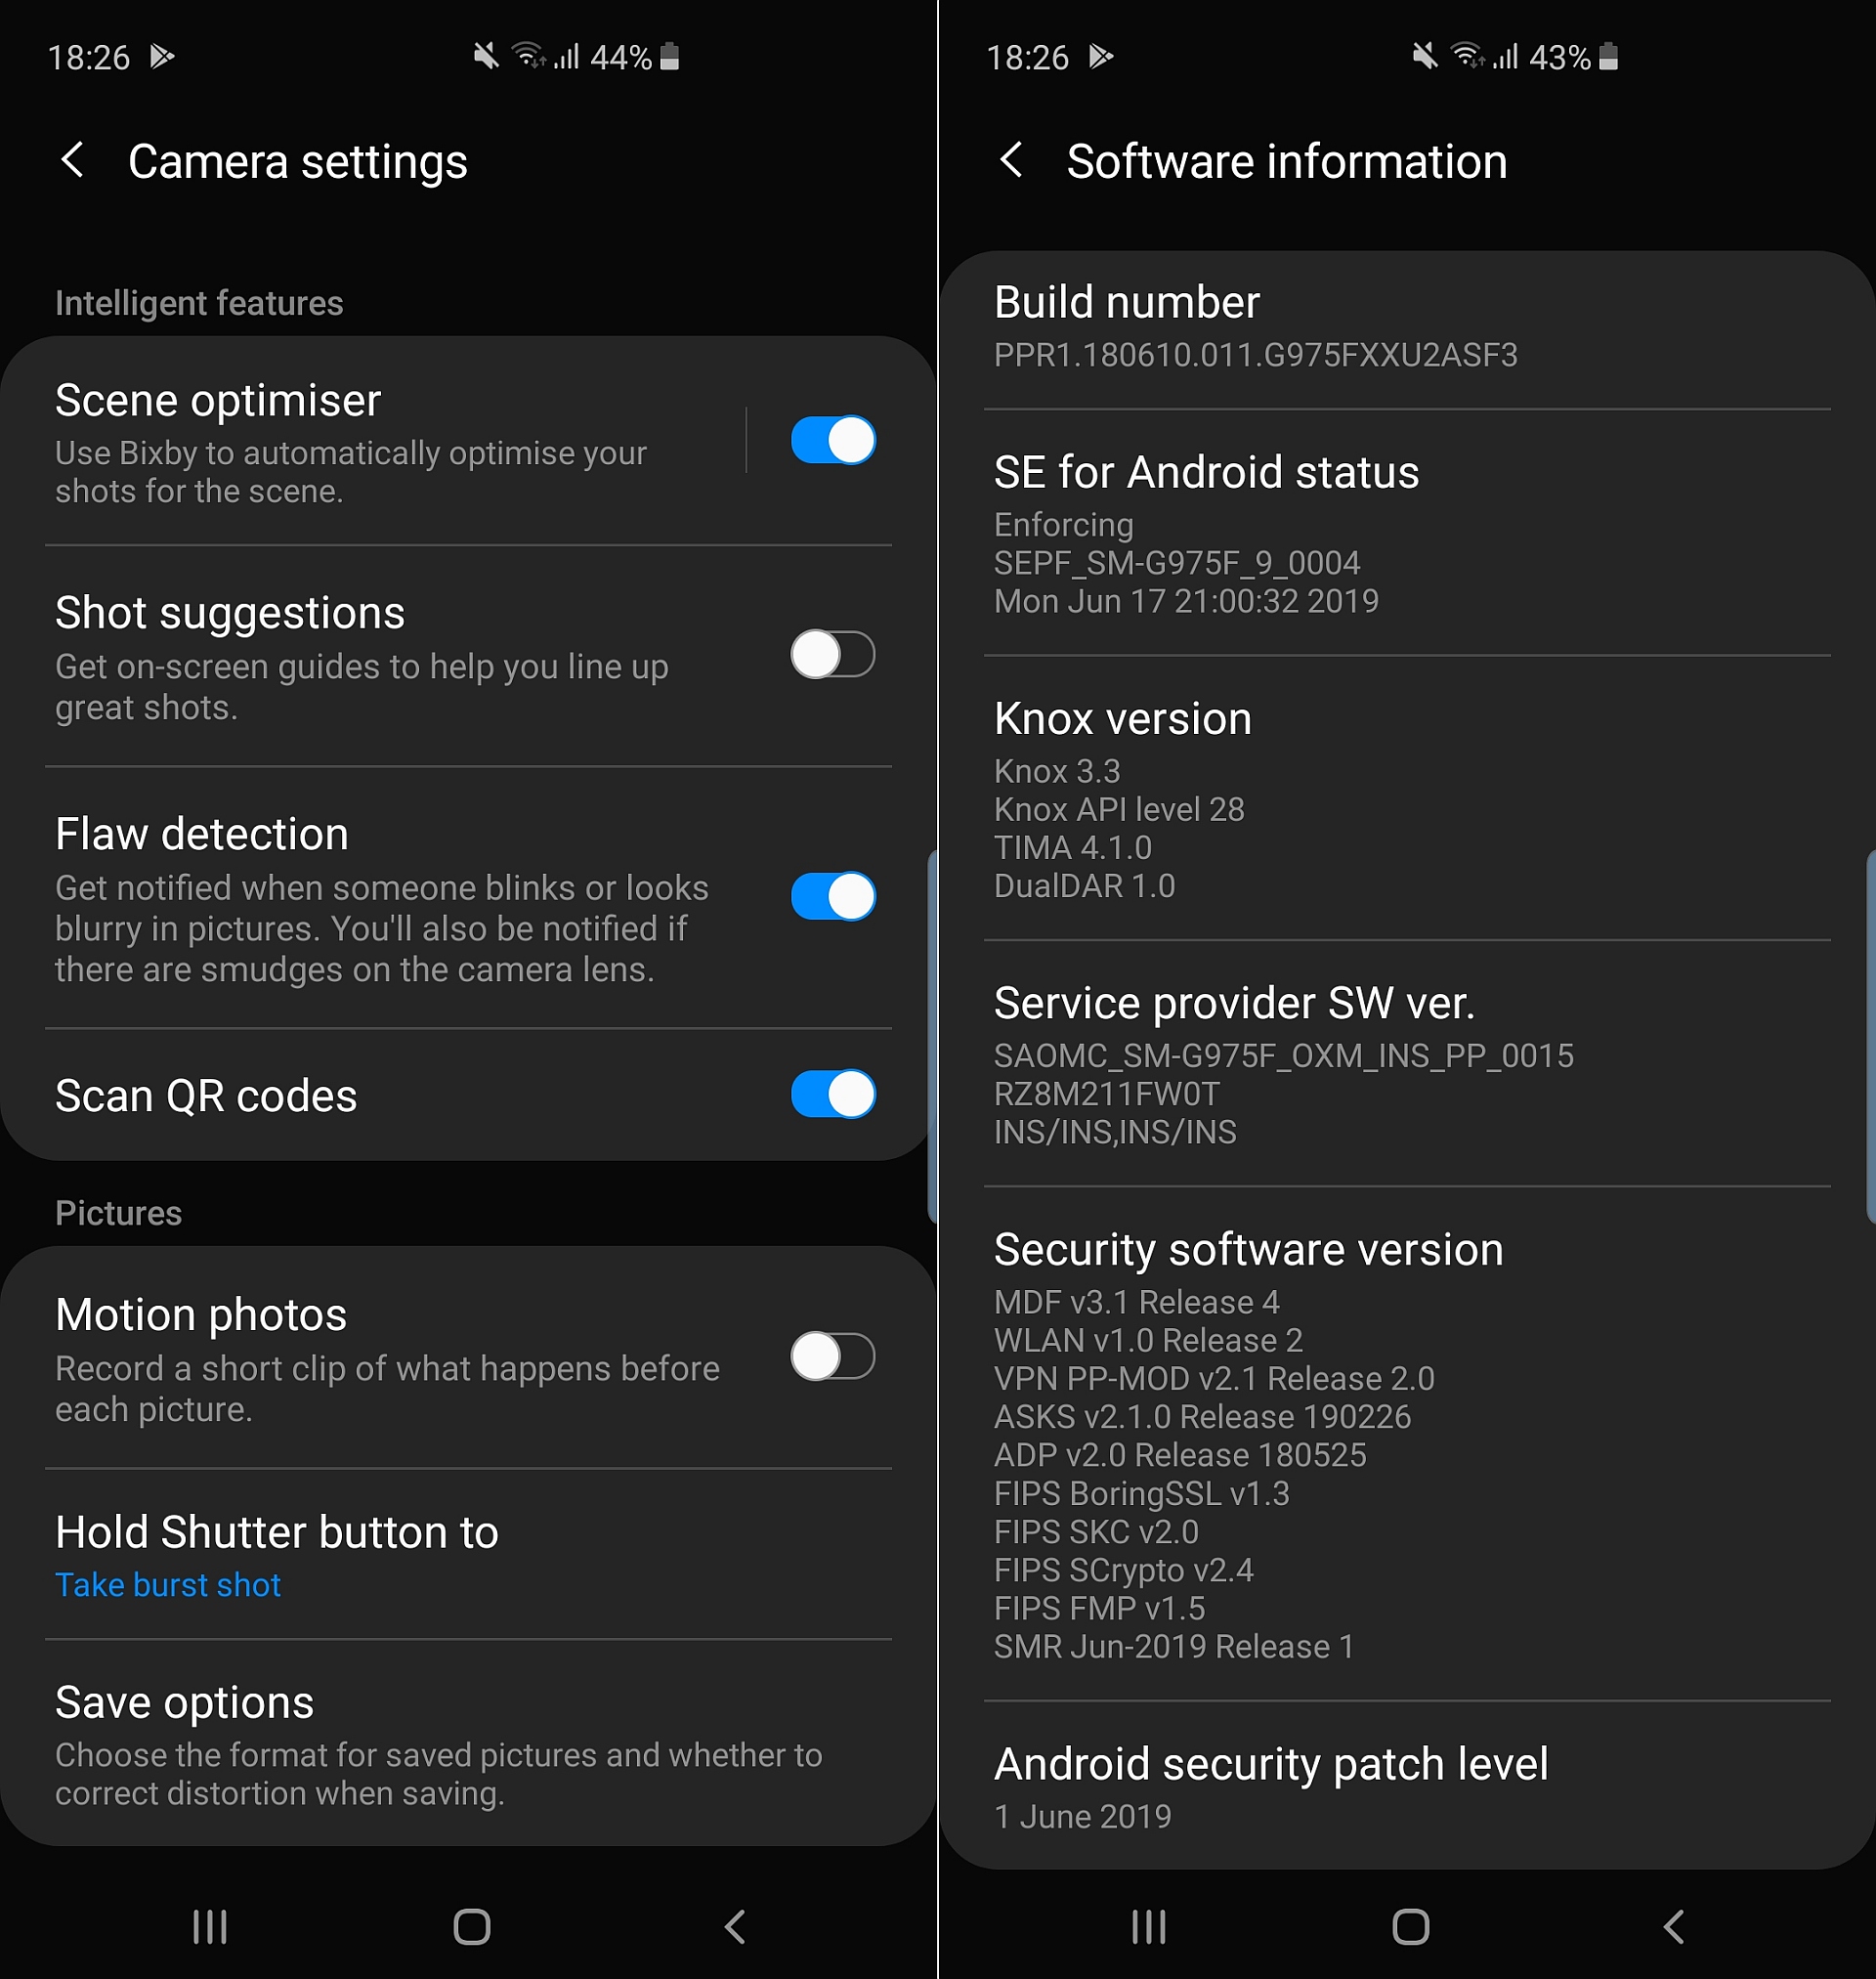 Substantially Finite Persistent Galaxy S10 June security update adds QR code scanning to camera app -  SamMobile